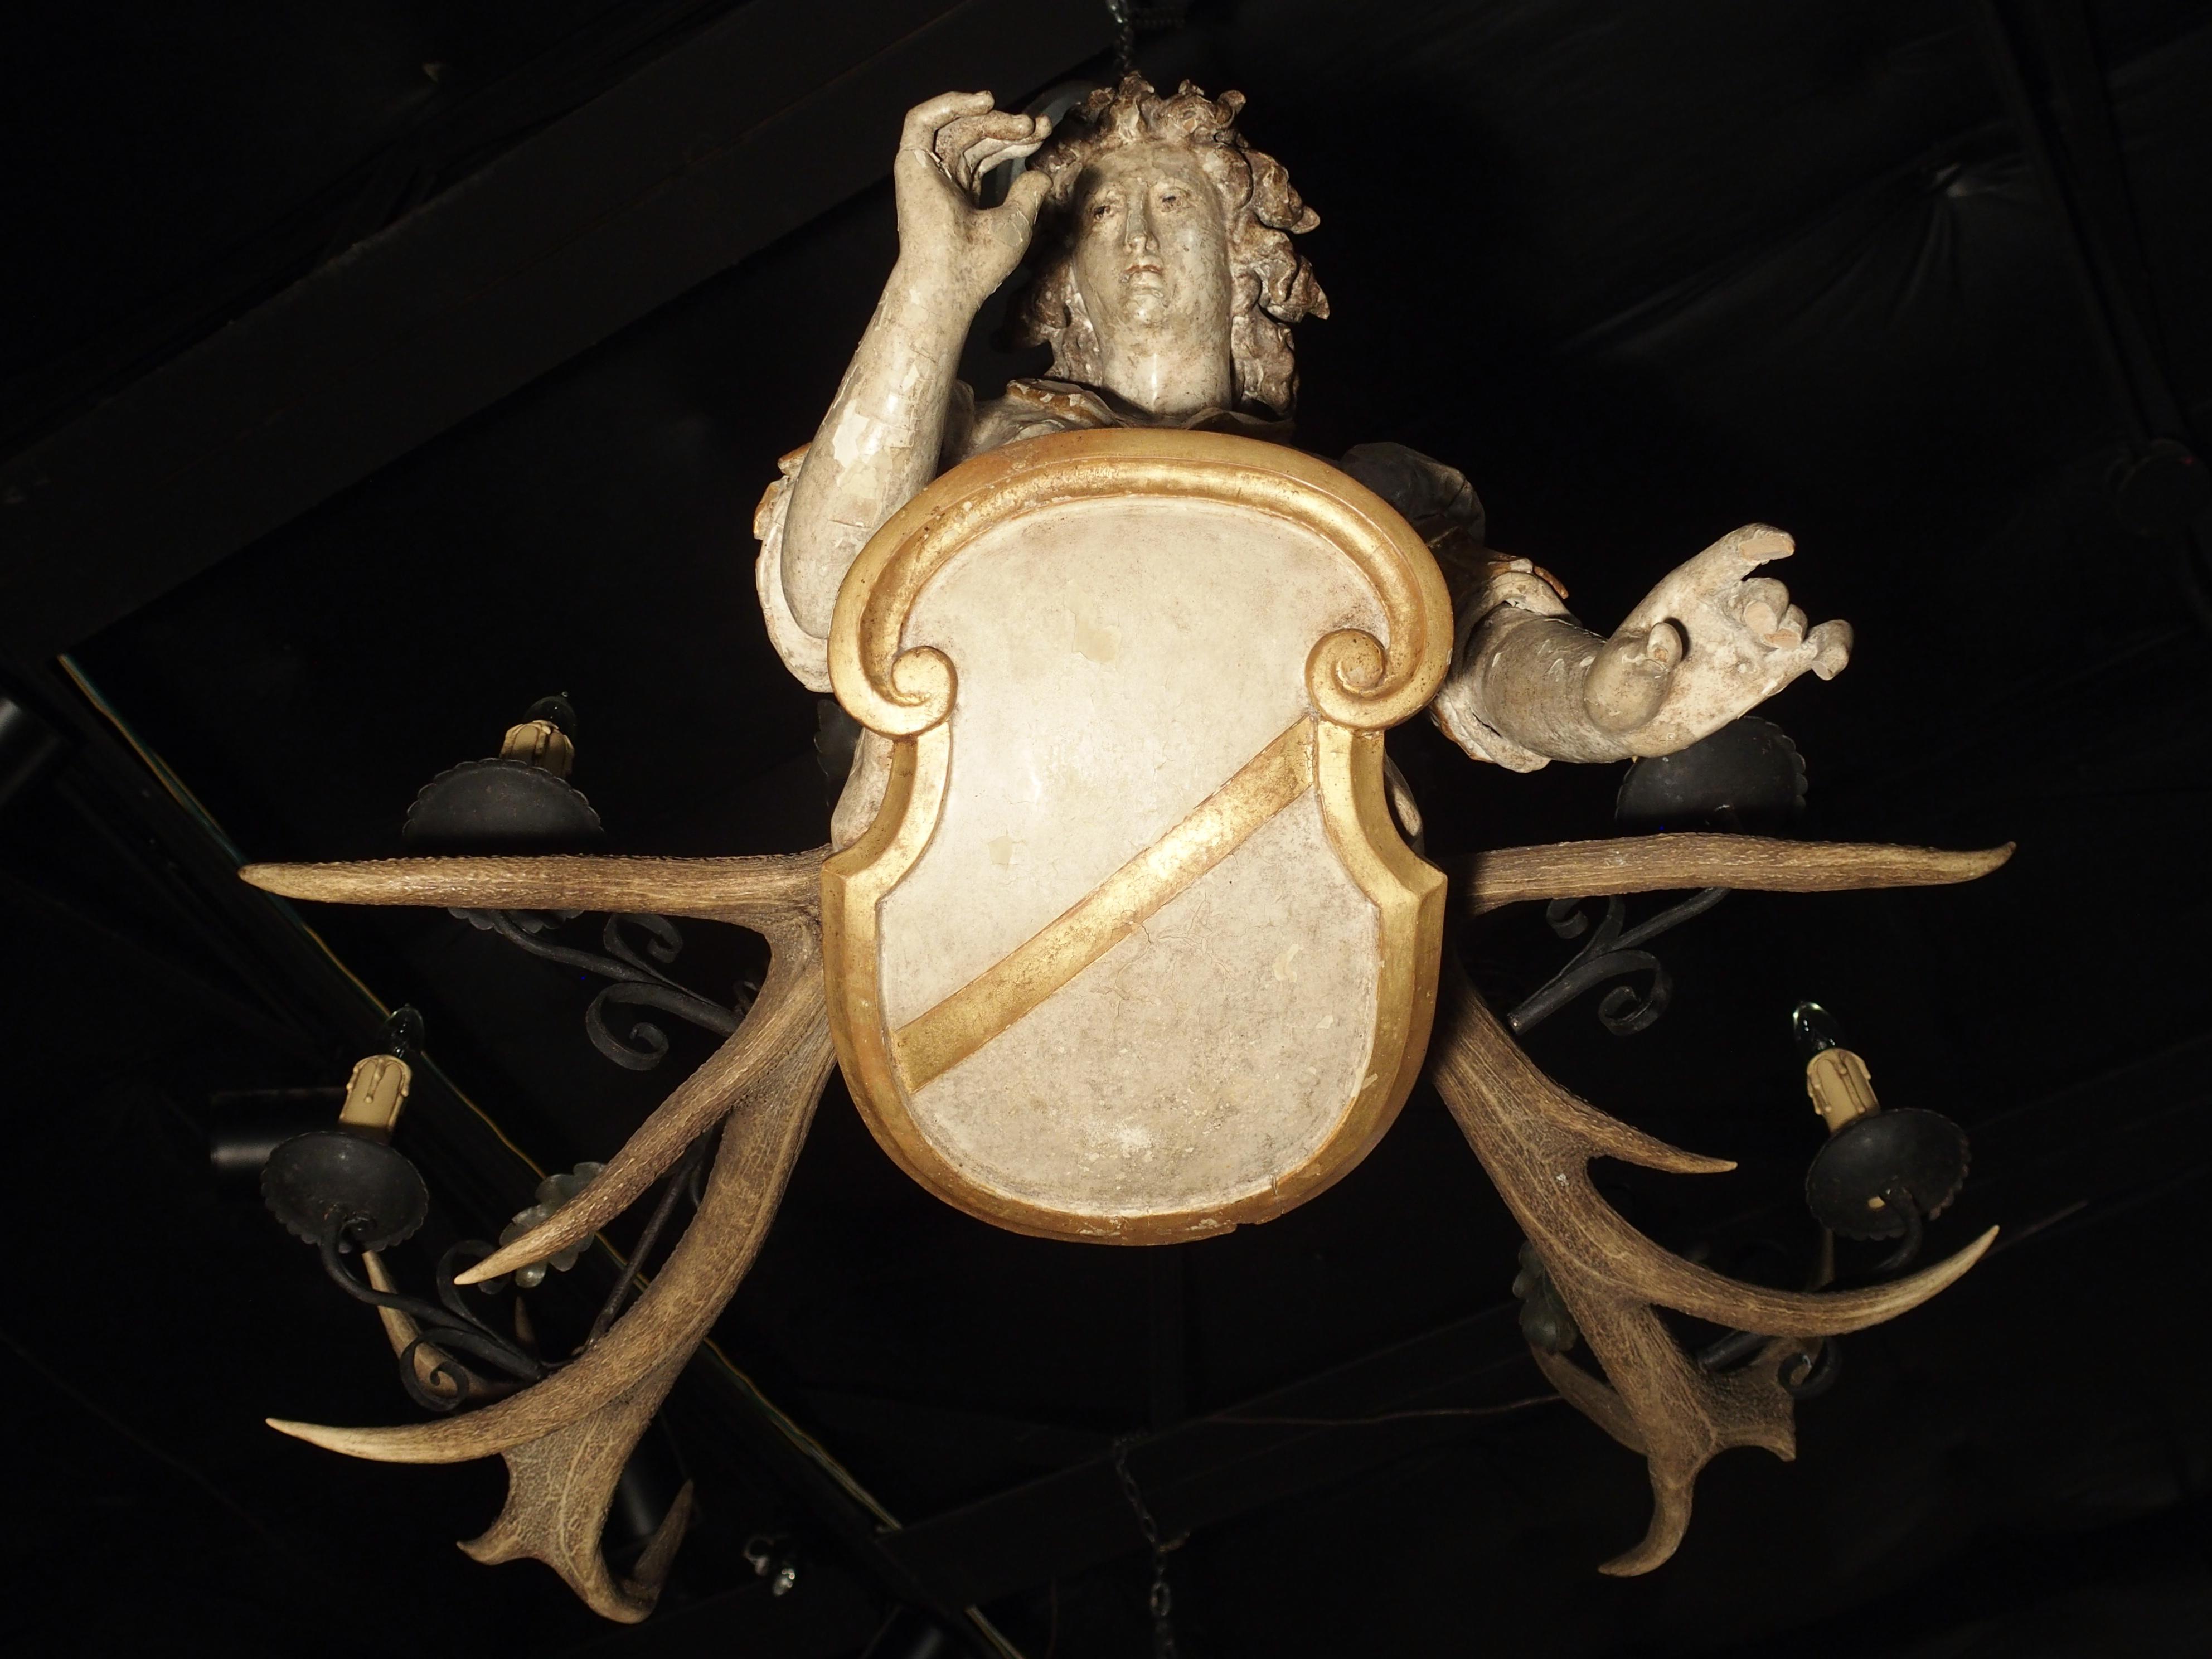 This fantastic figural chandelier is known in Germany as a Lustermannchen. The oldest examples on record date to the early 1400s, and were only made in Southern Germany. The combination of a carved wooden statue and large antlers made the perfect